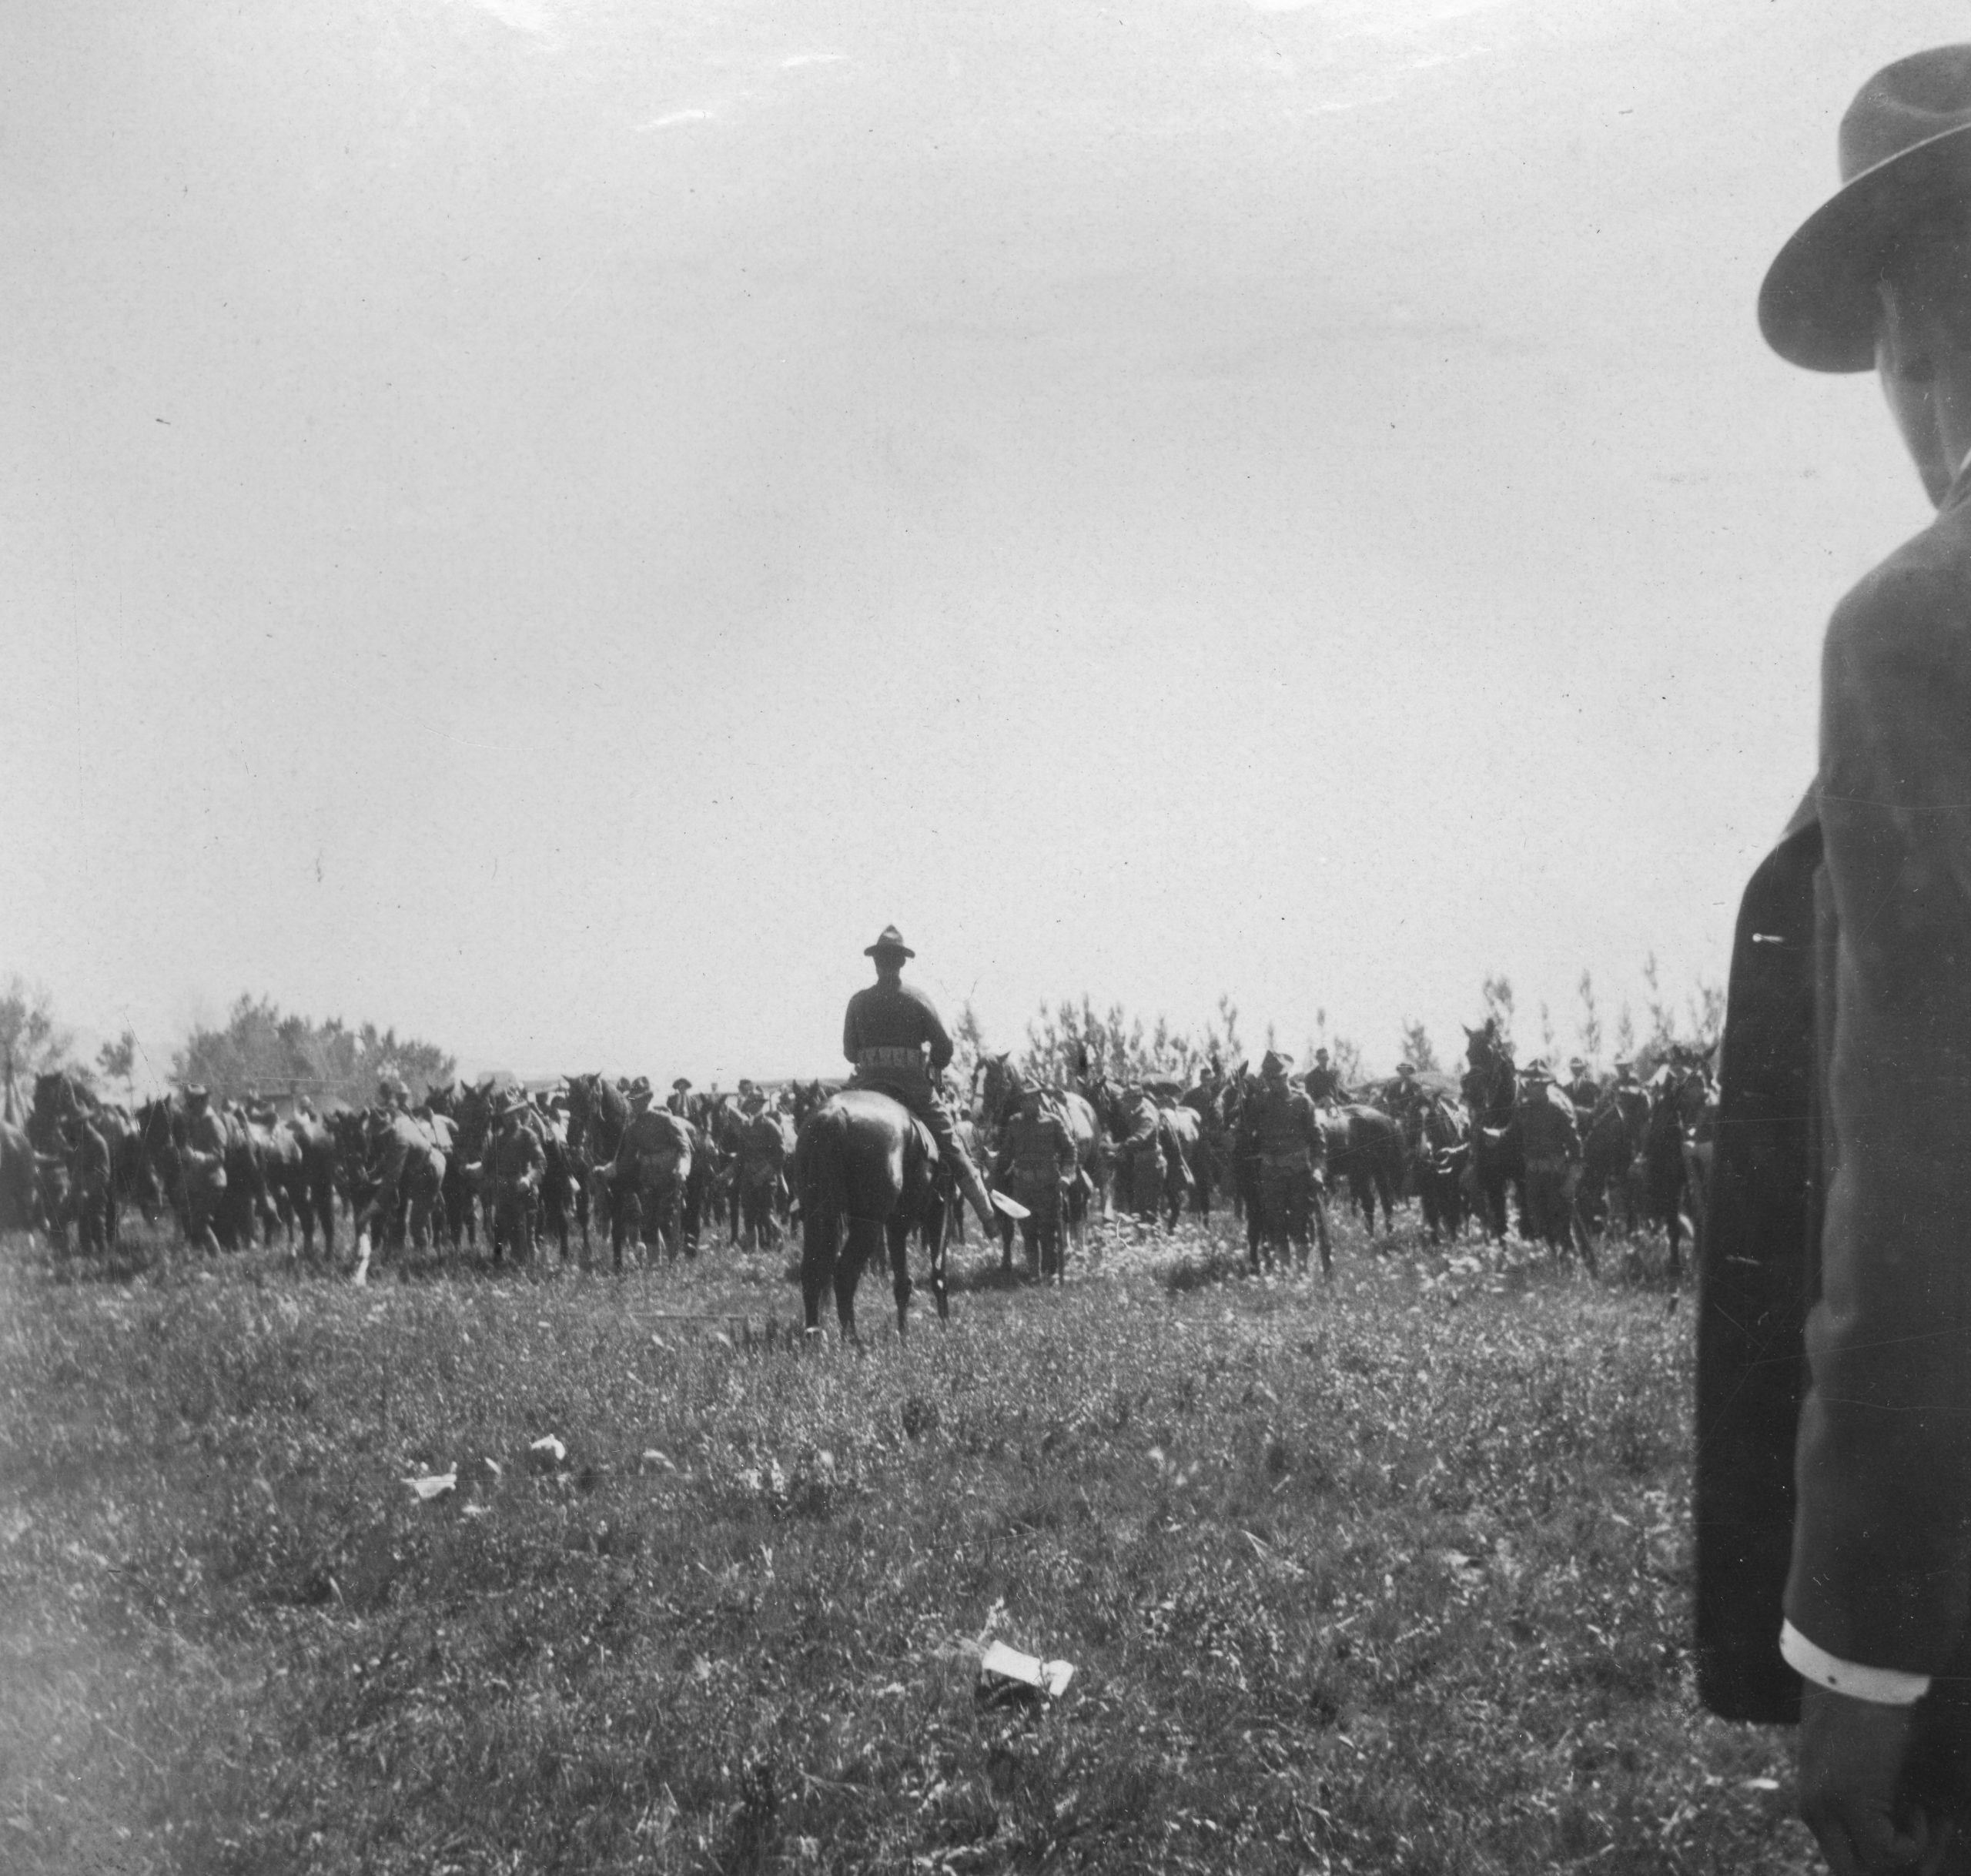 Soldiers with horses performing military drills at Fort Duchesne in 1910.